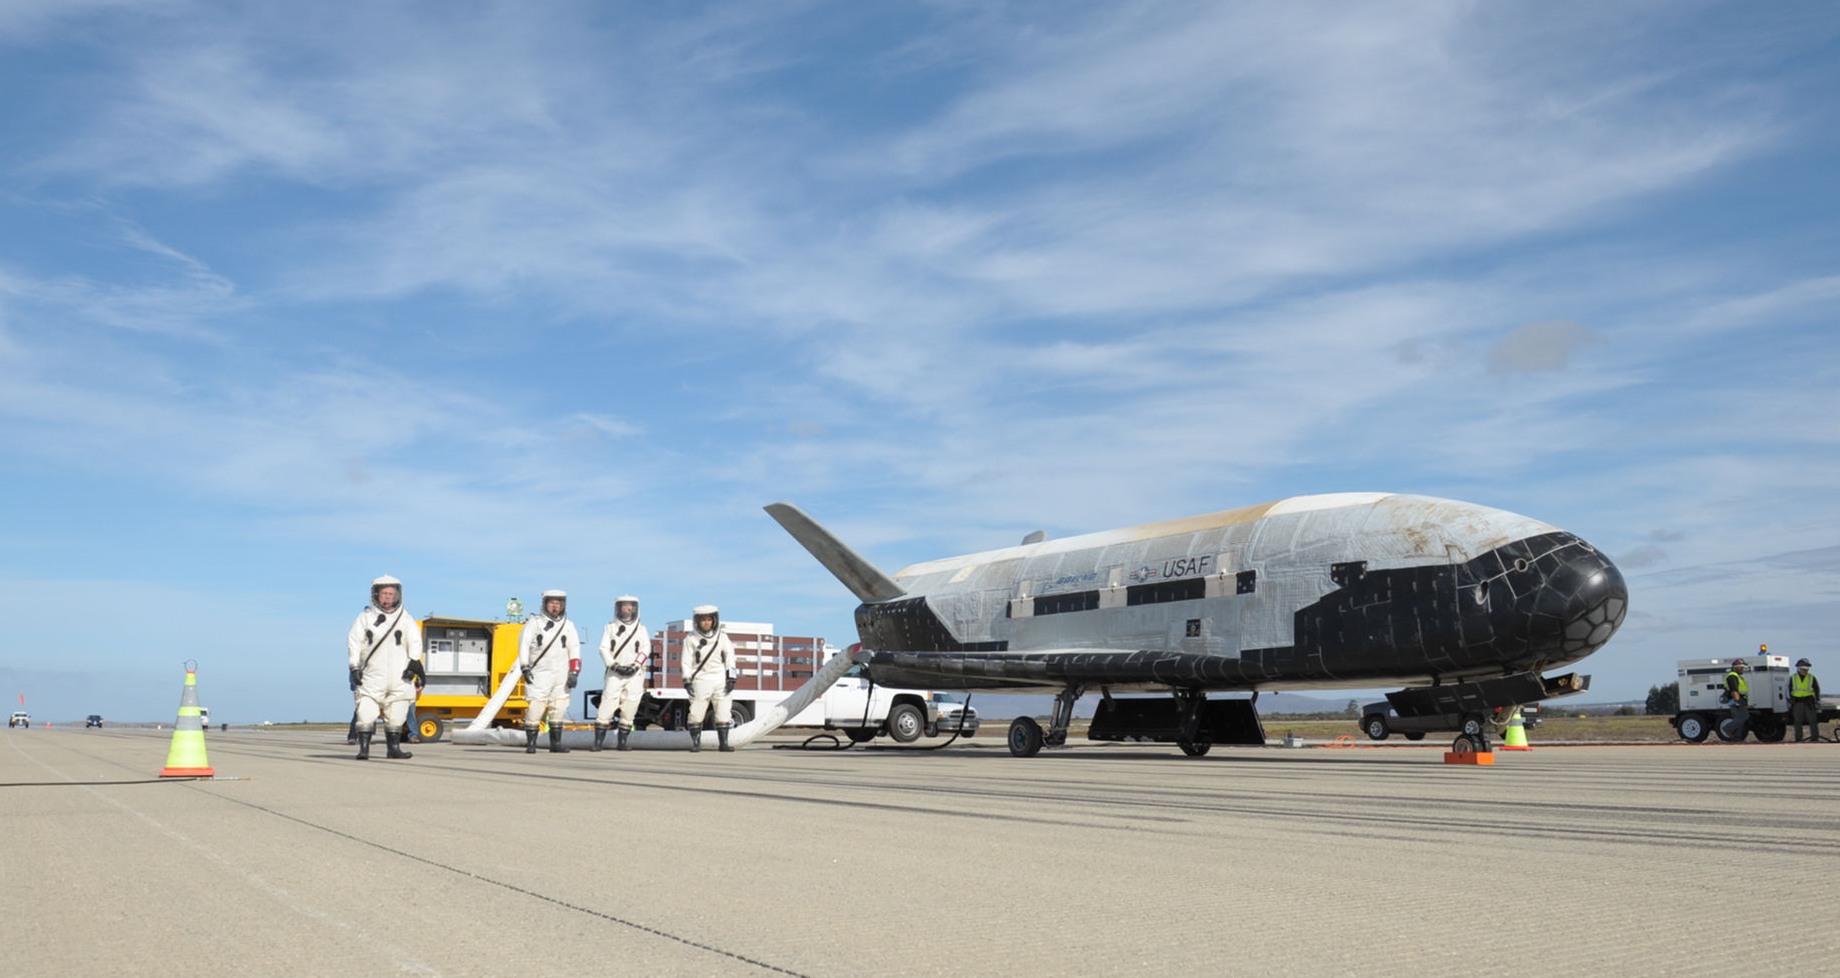 Pentagon’s Mysterious X-37B aircraft with astronauts around it